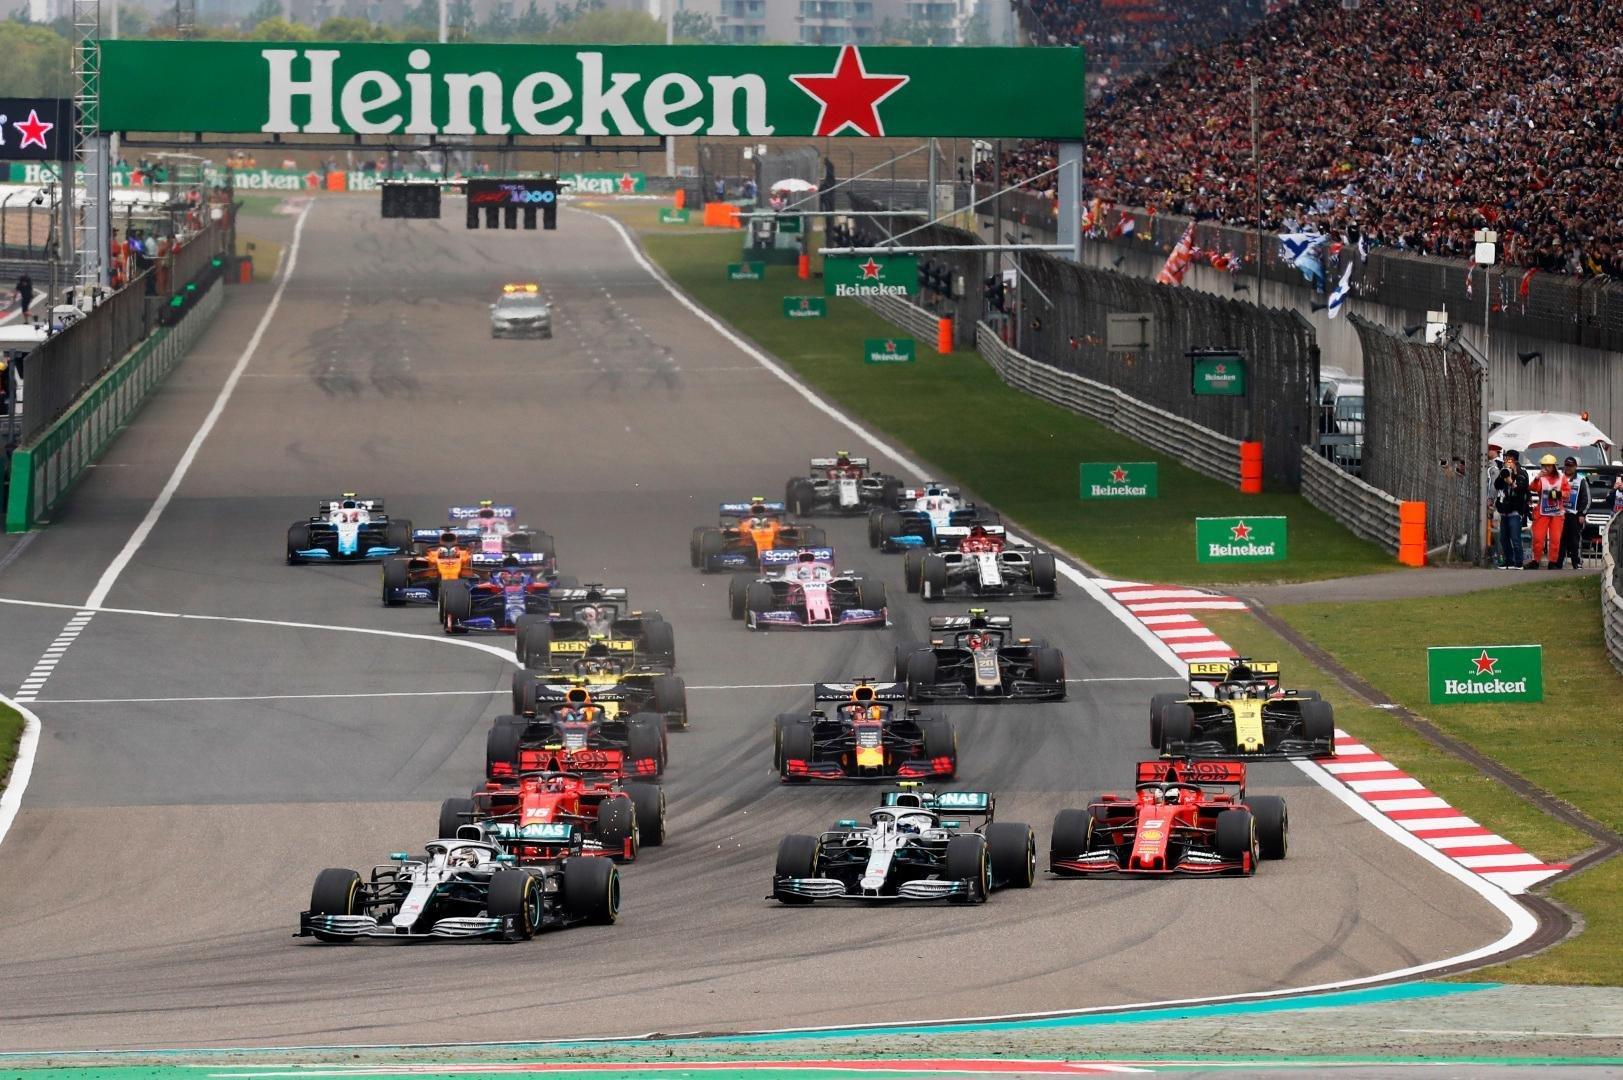 Chinese Grand Prix: 10 best F1 picture of 2019's race